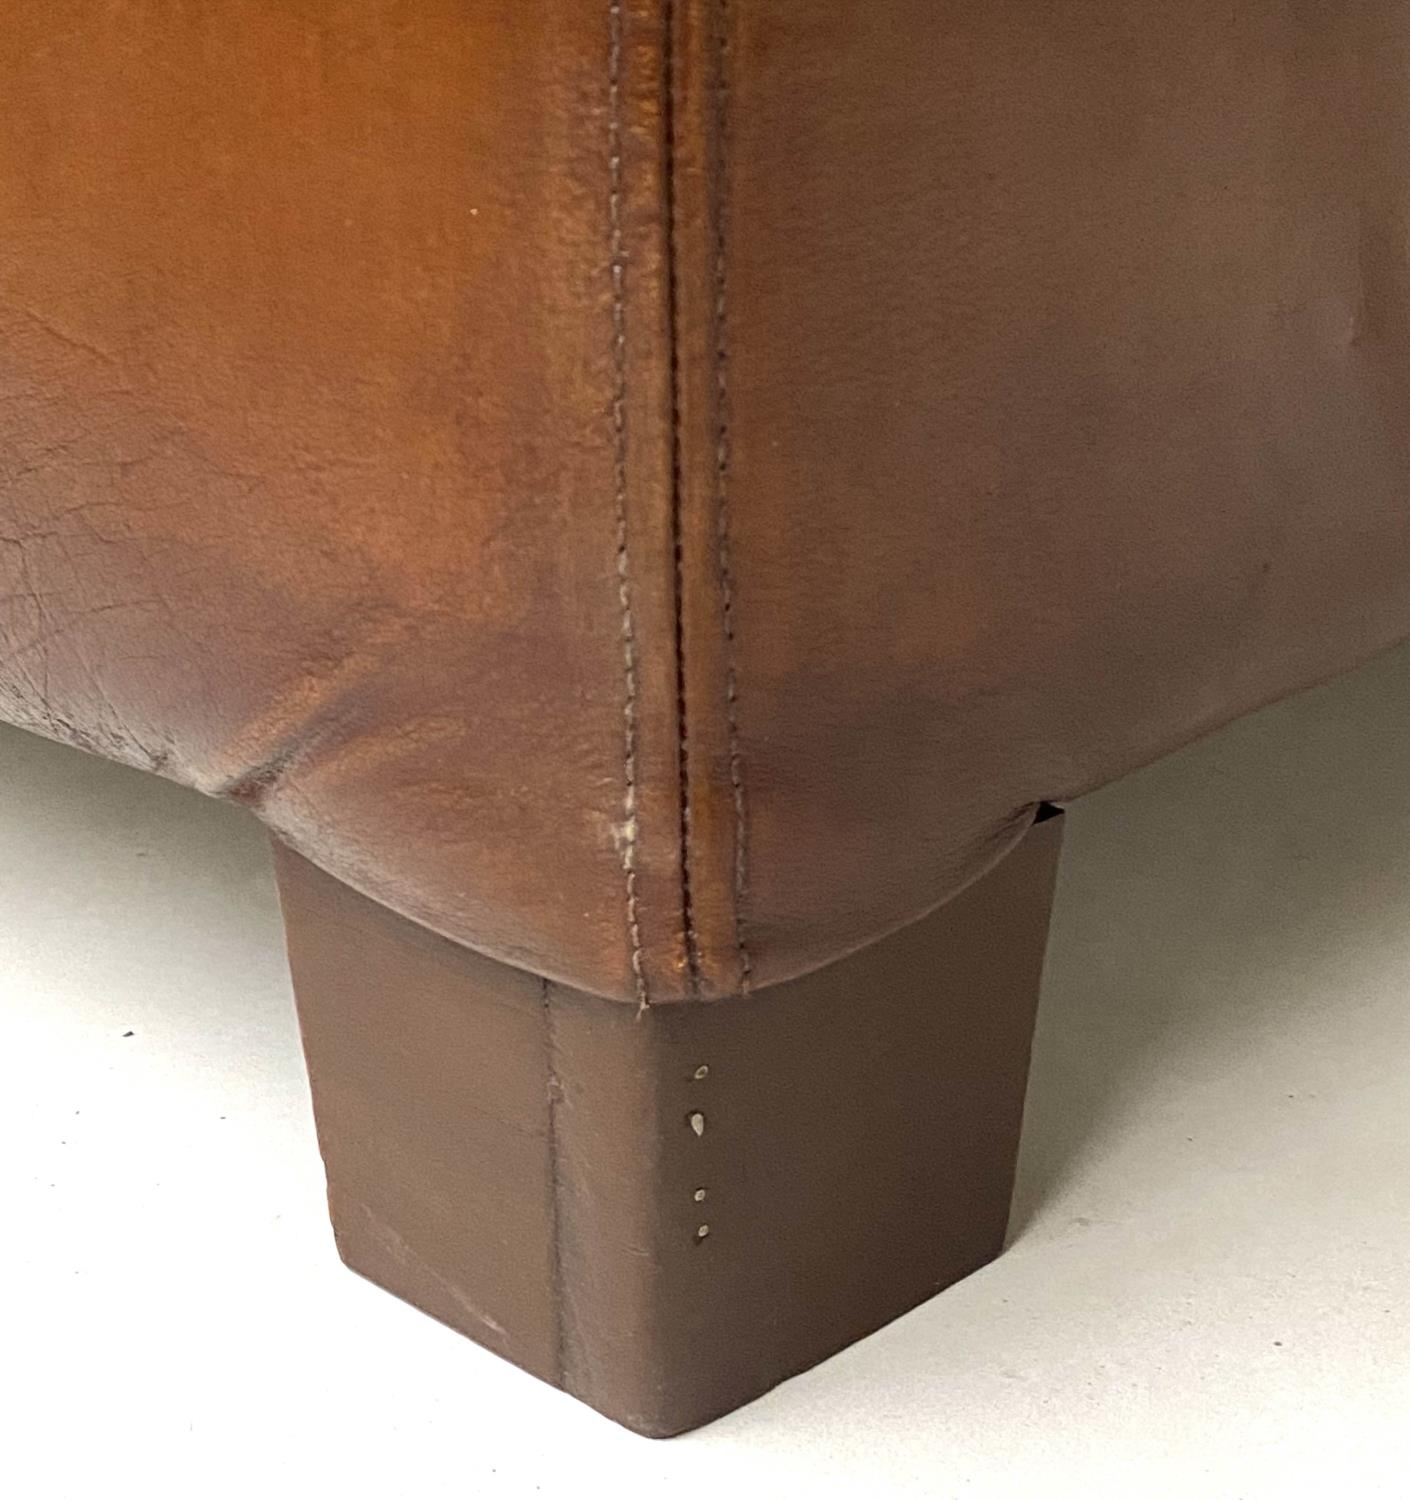 CENTRE STOOL, square stitched natural tan leather, 65cm x 65cm x 50cm H. - Image 2 of 6